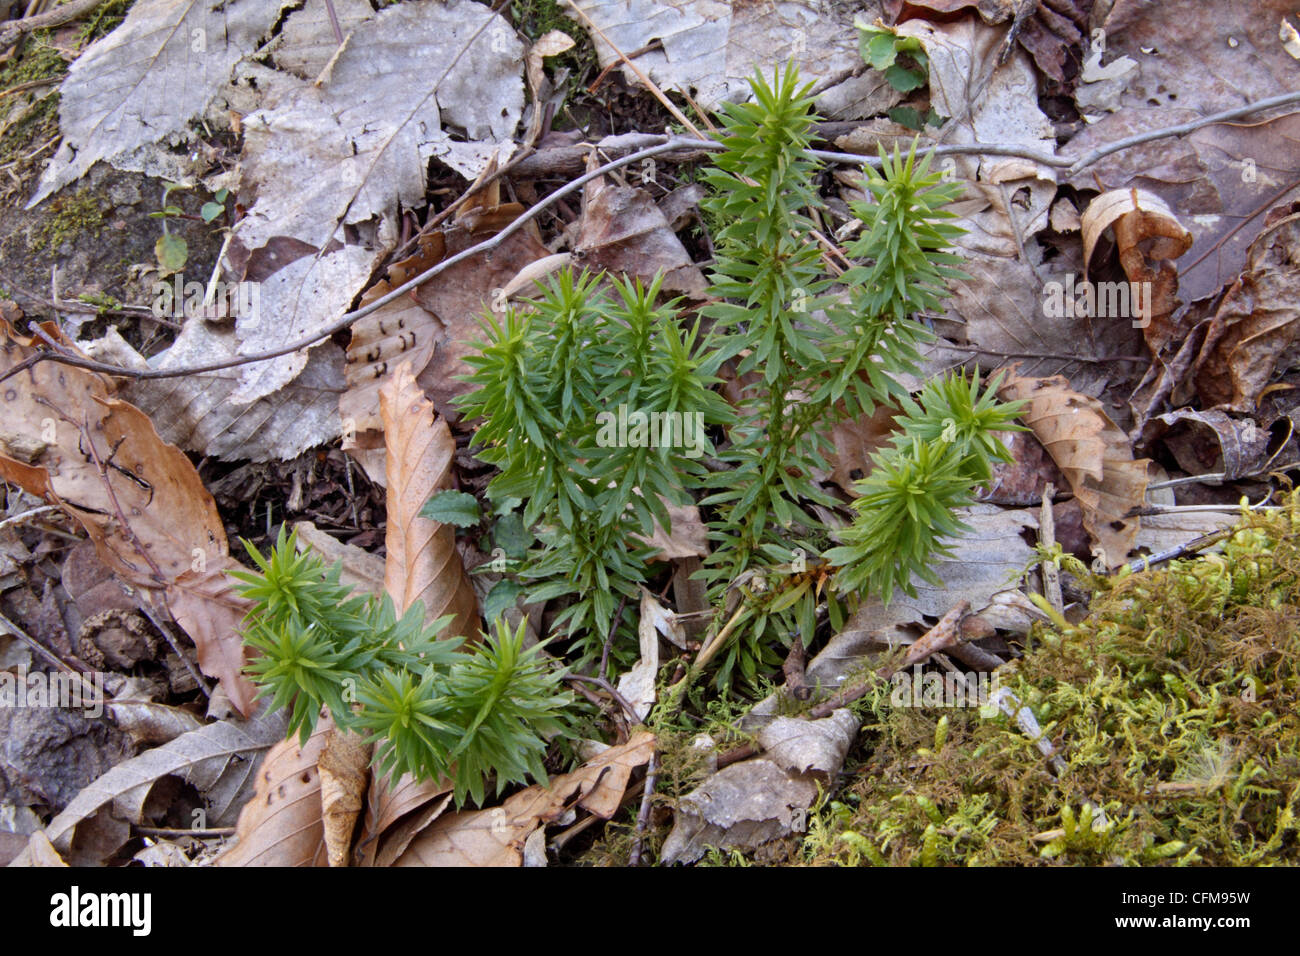 Shining clubmoss growing amongst dead leaves on a forest floor in Tennessee Stock Photo